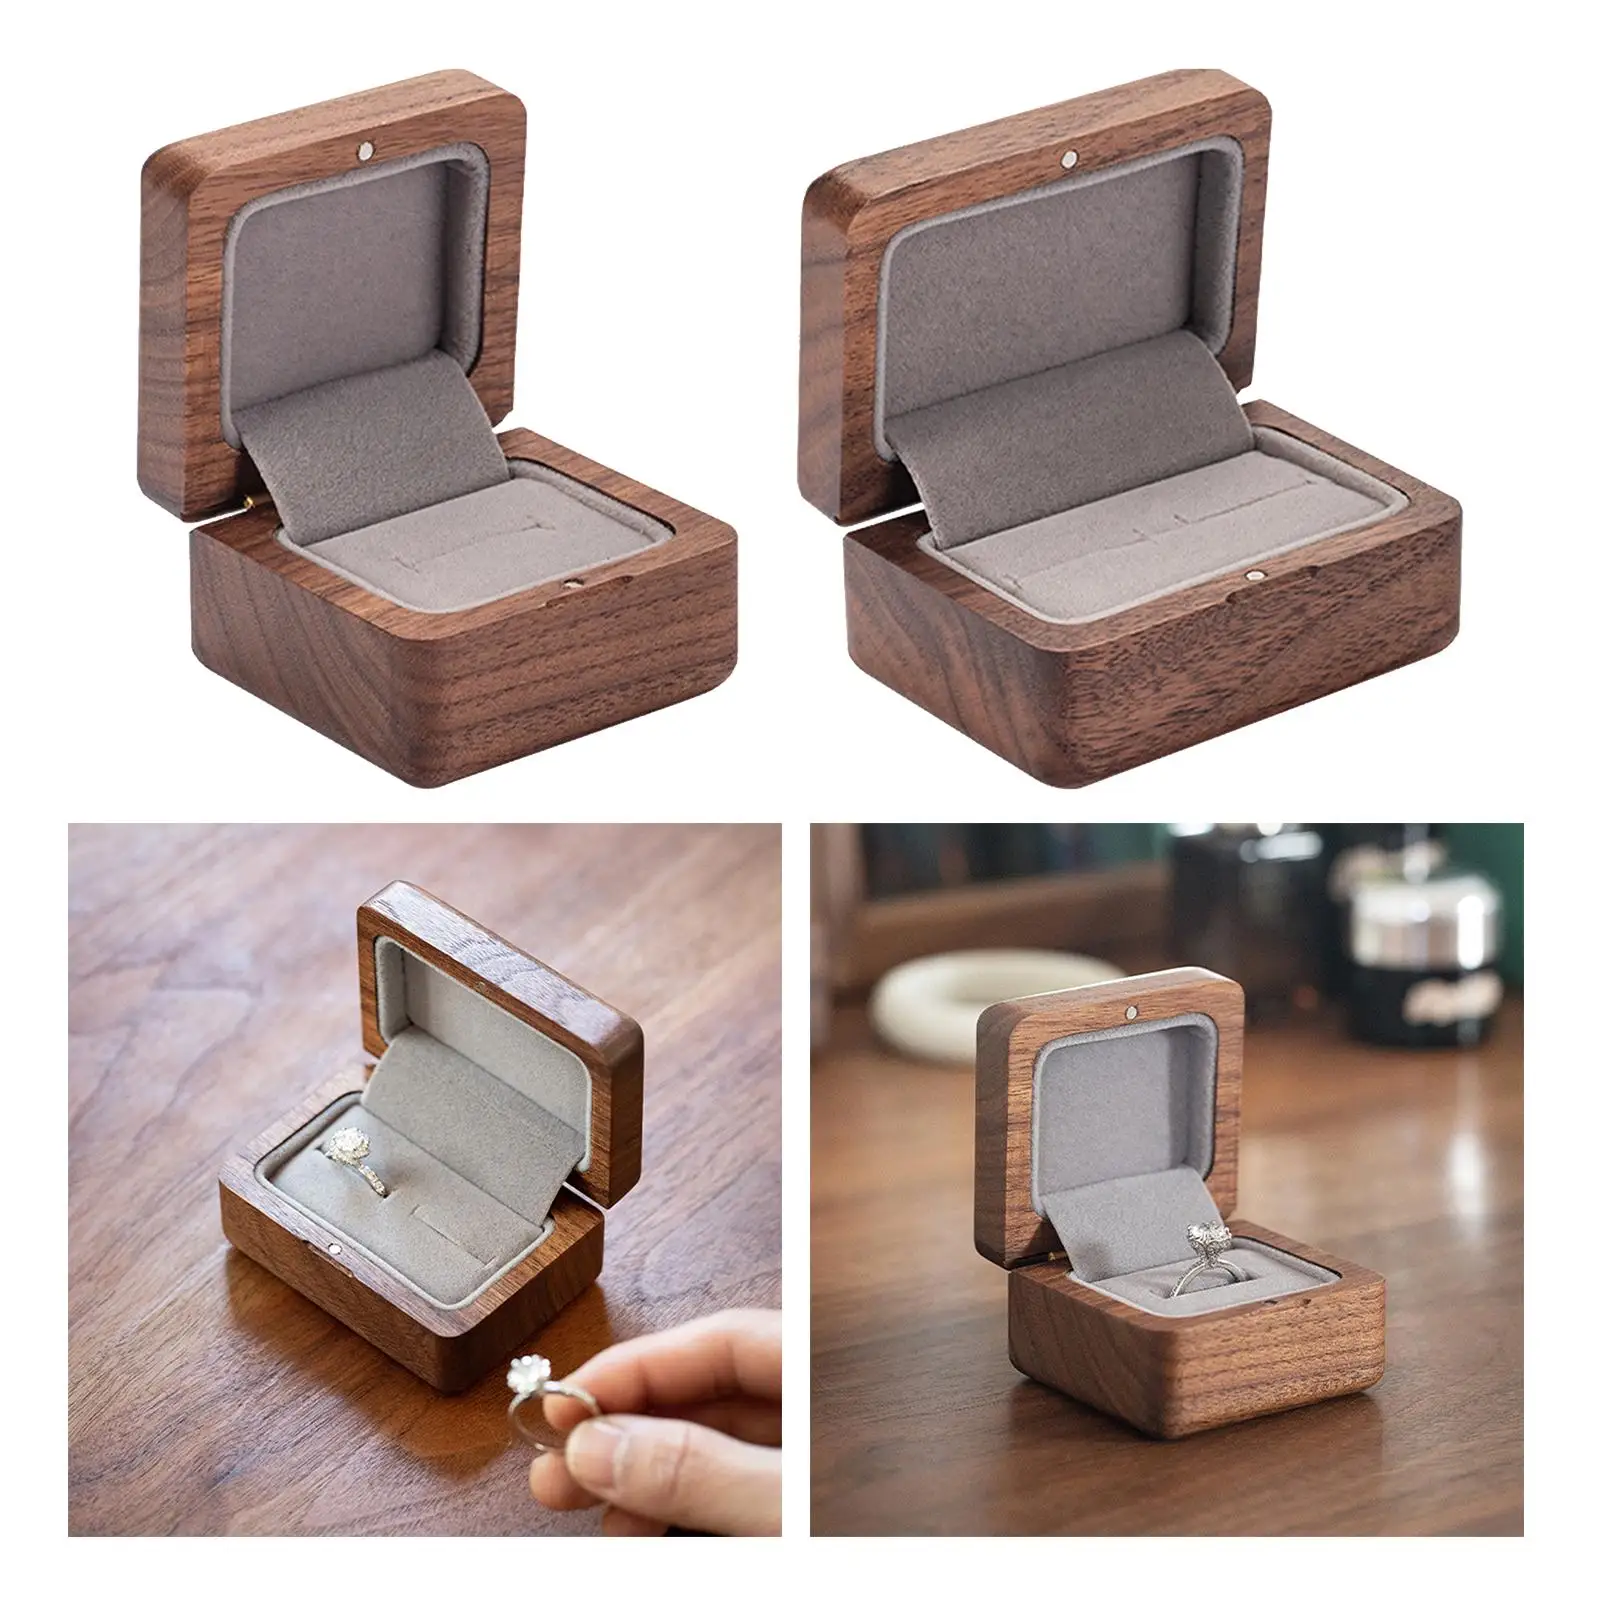 Wooden Ring Box Personalized Handmade Wooden Ring Case Ring Holder Box for Wedding Anniversary Ceremony Engagement Birthday Gift